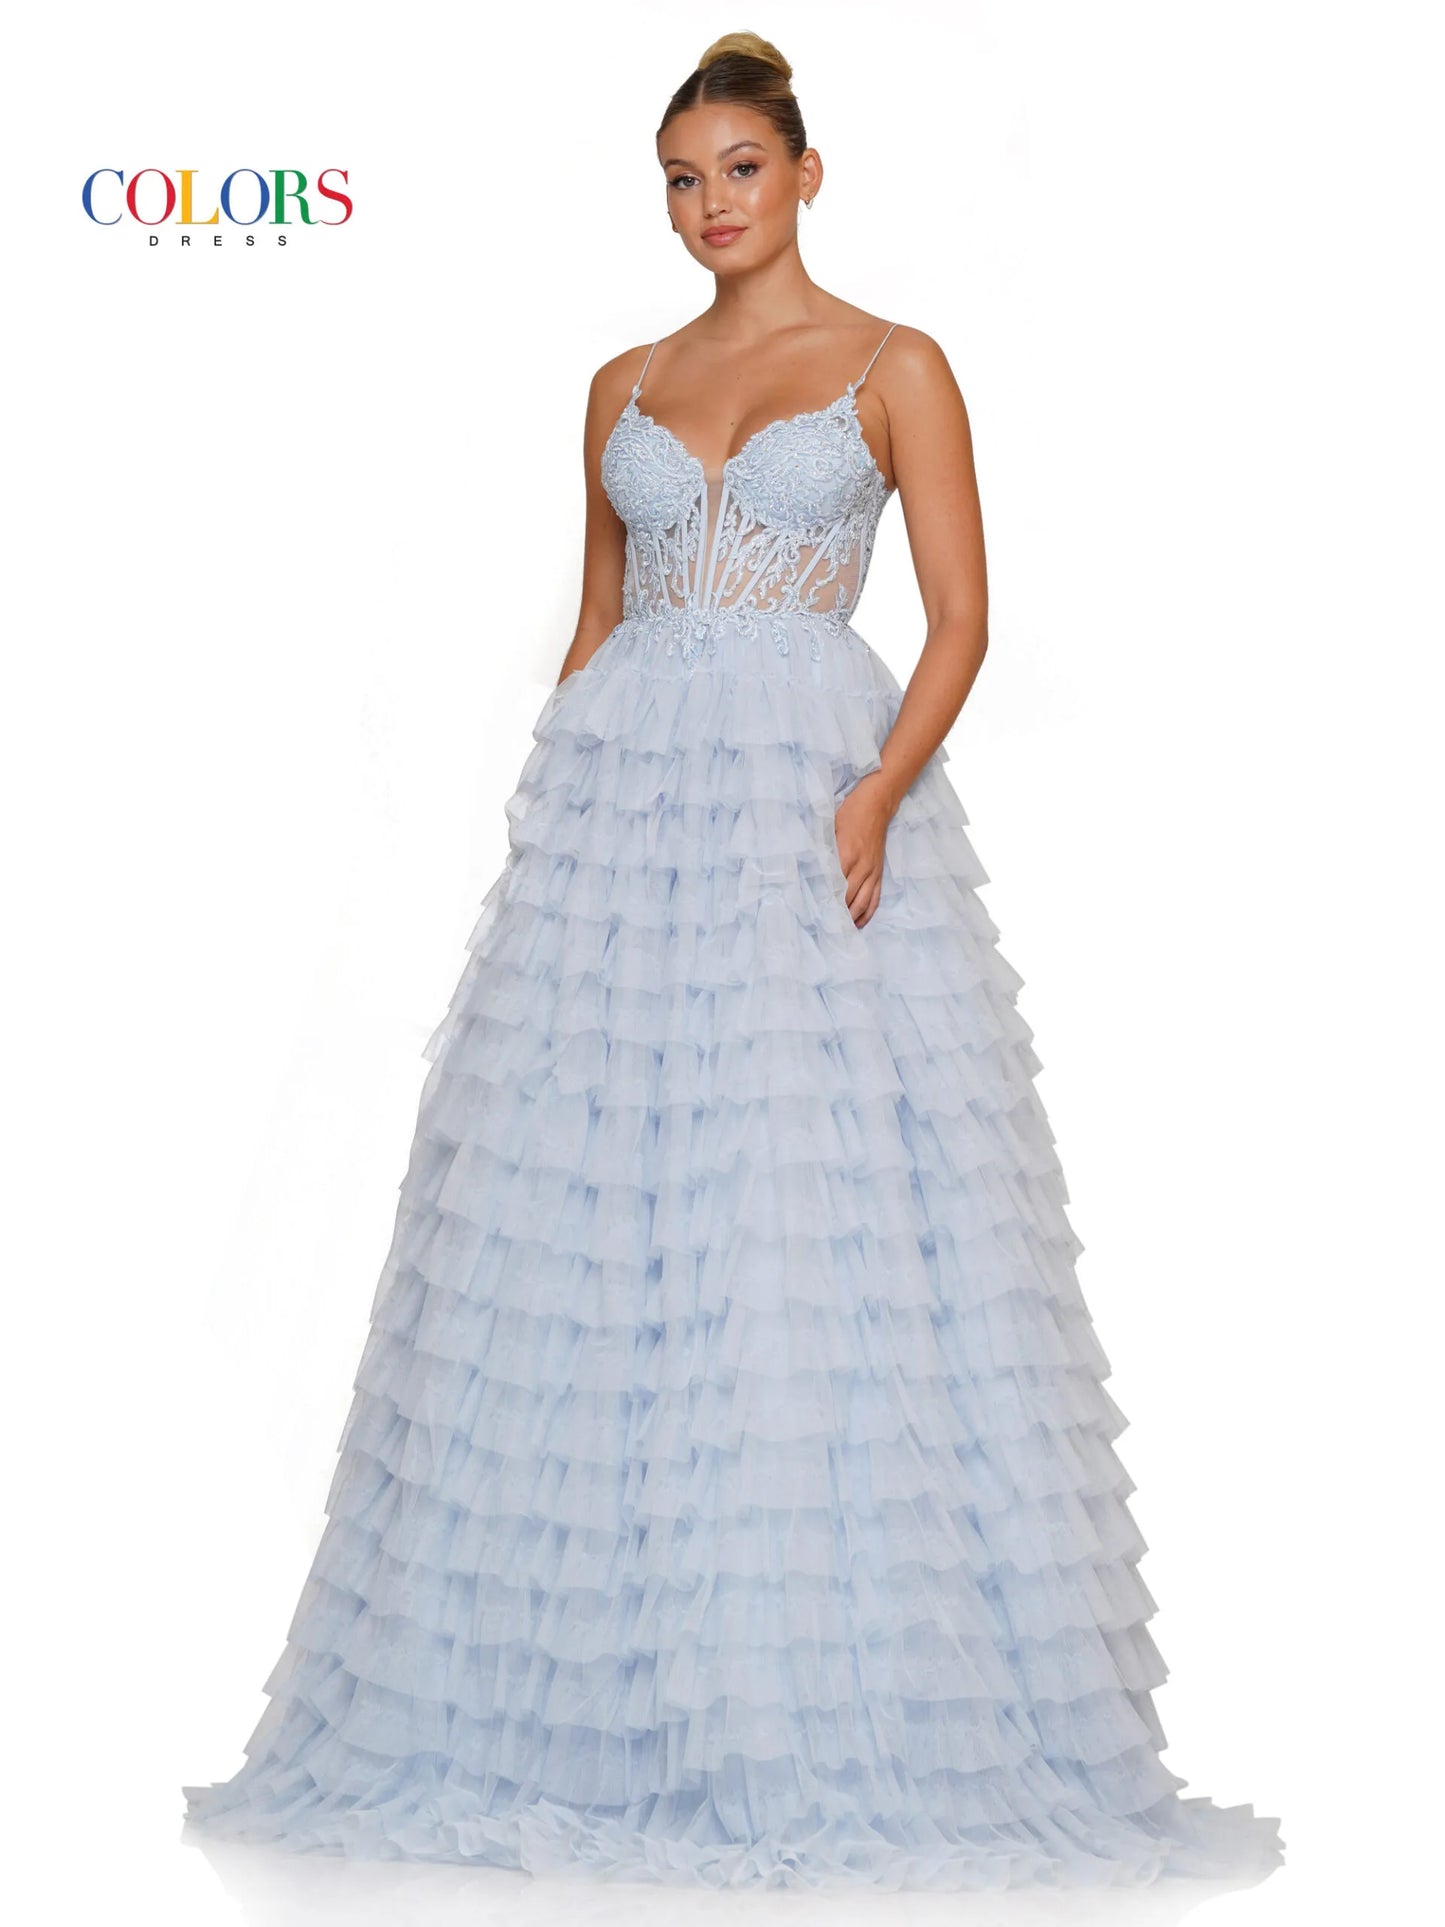 Colors Dress 3219 is a formal gown featuring a long sheer lace embellished v neck corset with ruffled layers and an elegant ball gown skirt. Embellished details add a luxurious touch to the design, making it perfect for proms and special occasions.  Sizes: 2-24  Colors: Black, Light Blue, Mint, Pink